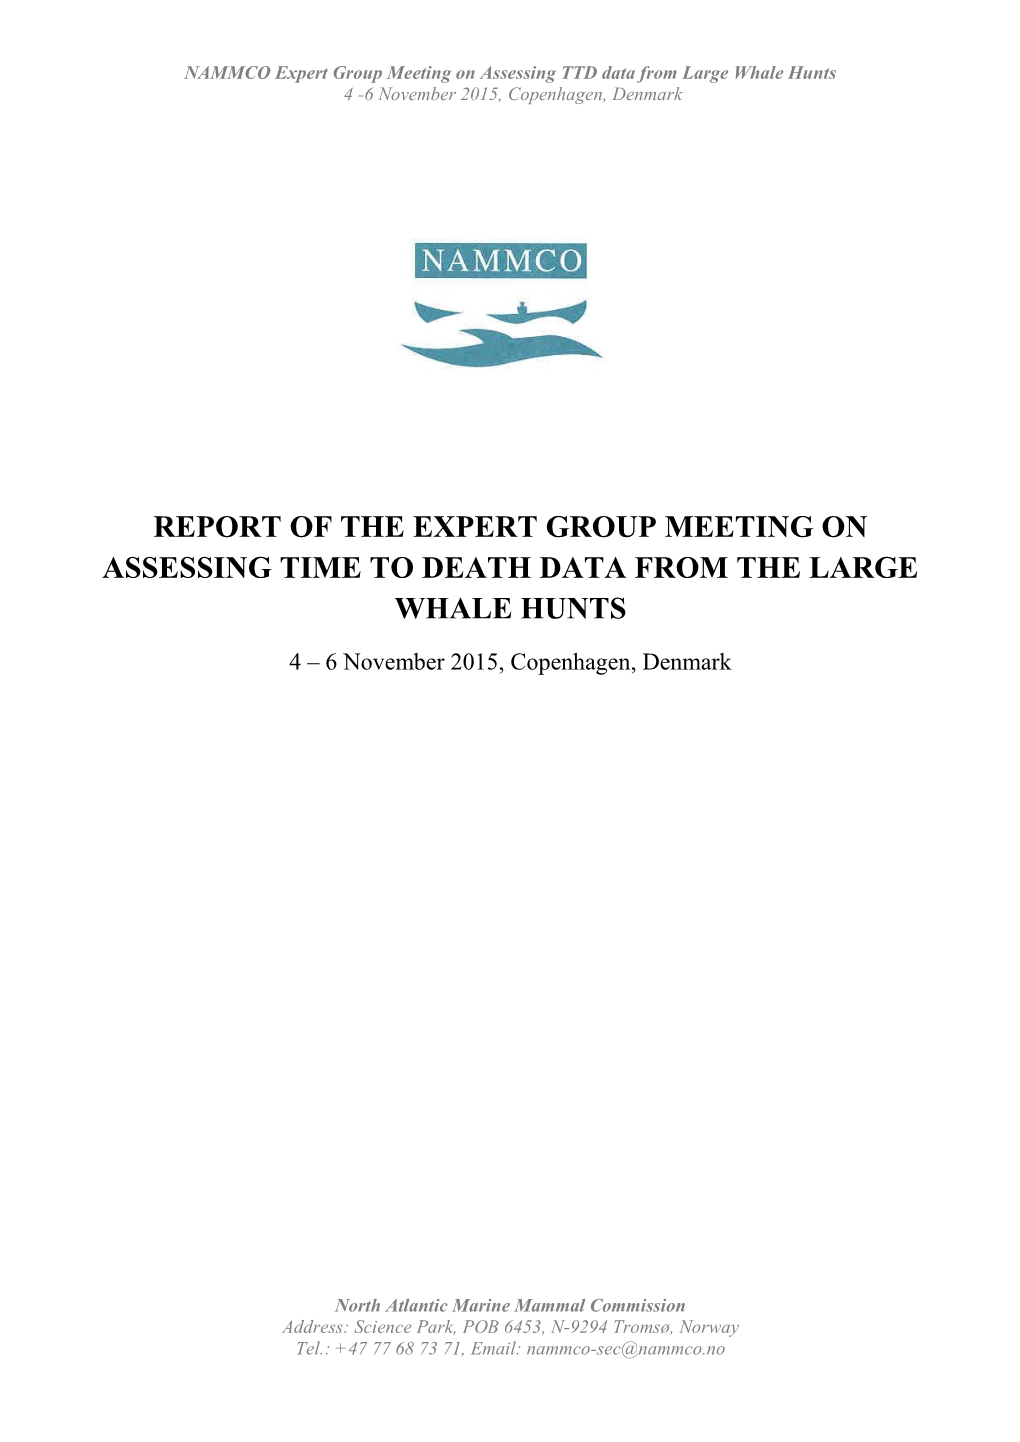 Report of the Expert Group Meeting on Assessing Time to Death Data from the Large Whale Hunts